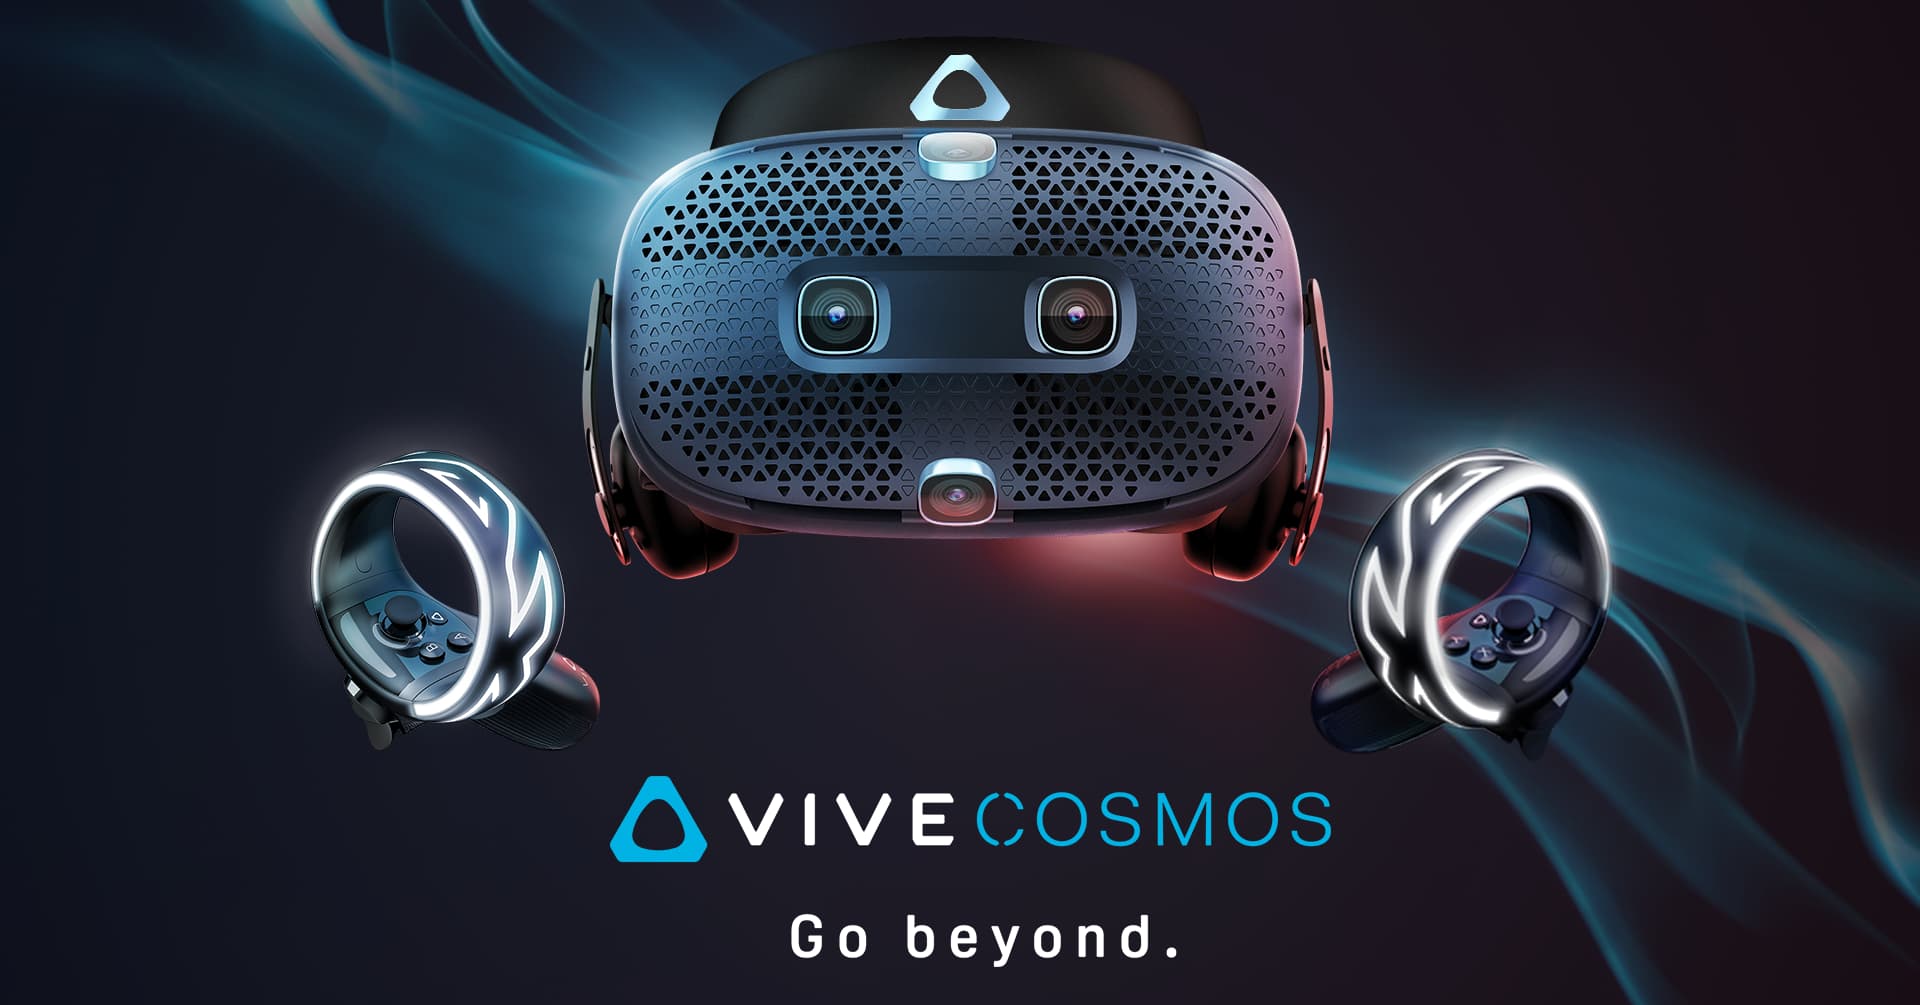 vive-cosmos-review-a-good-vr-headset-with-stiff-competition